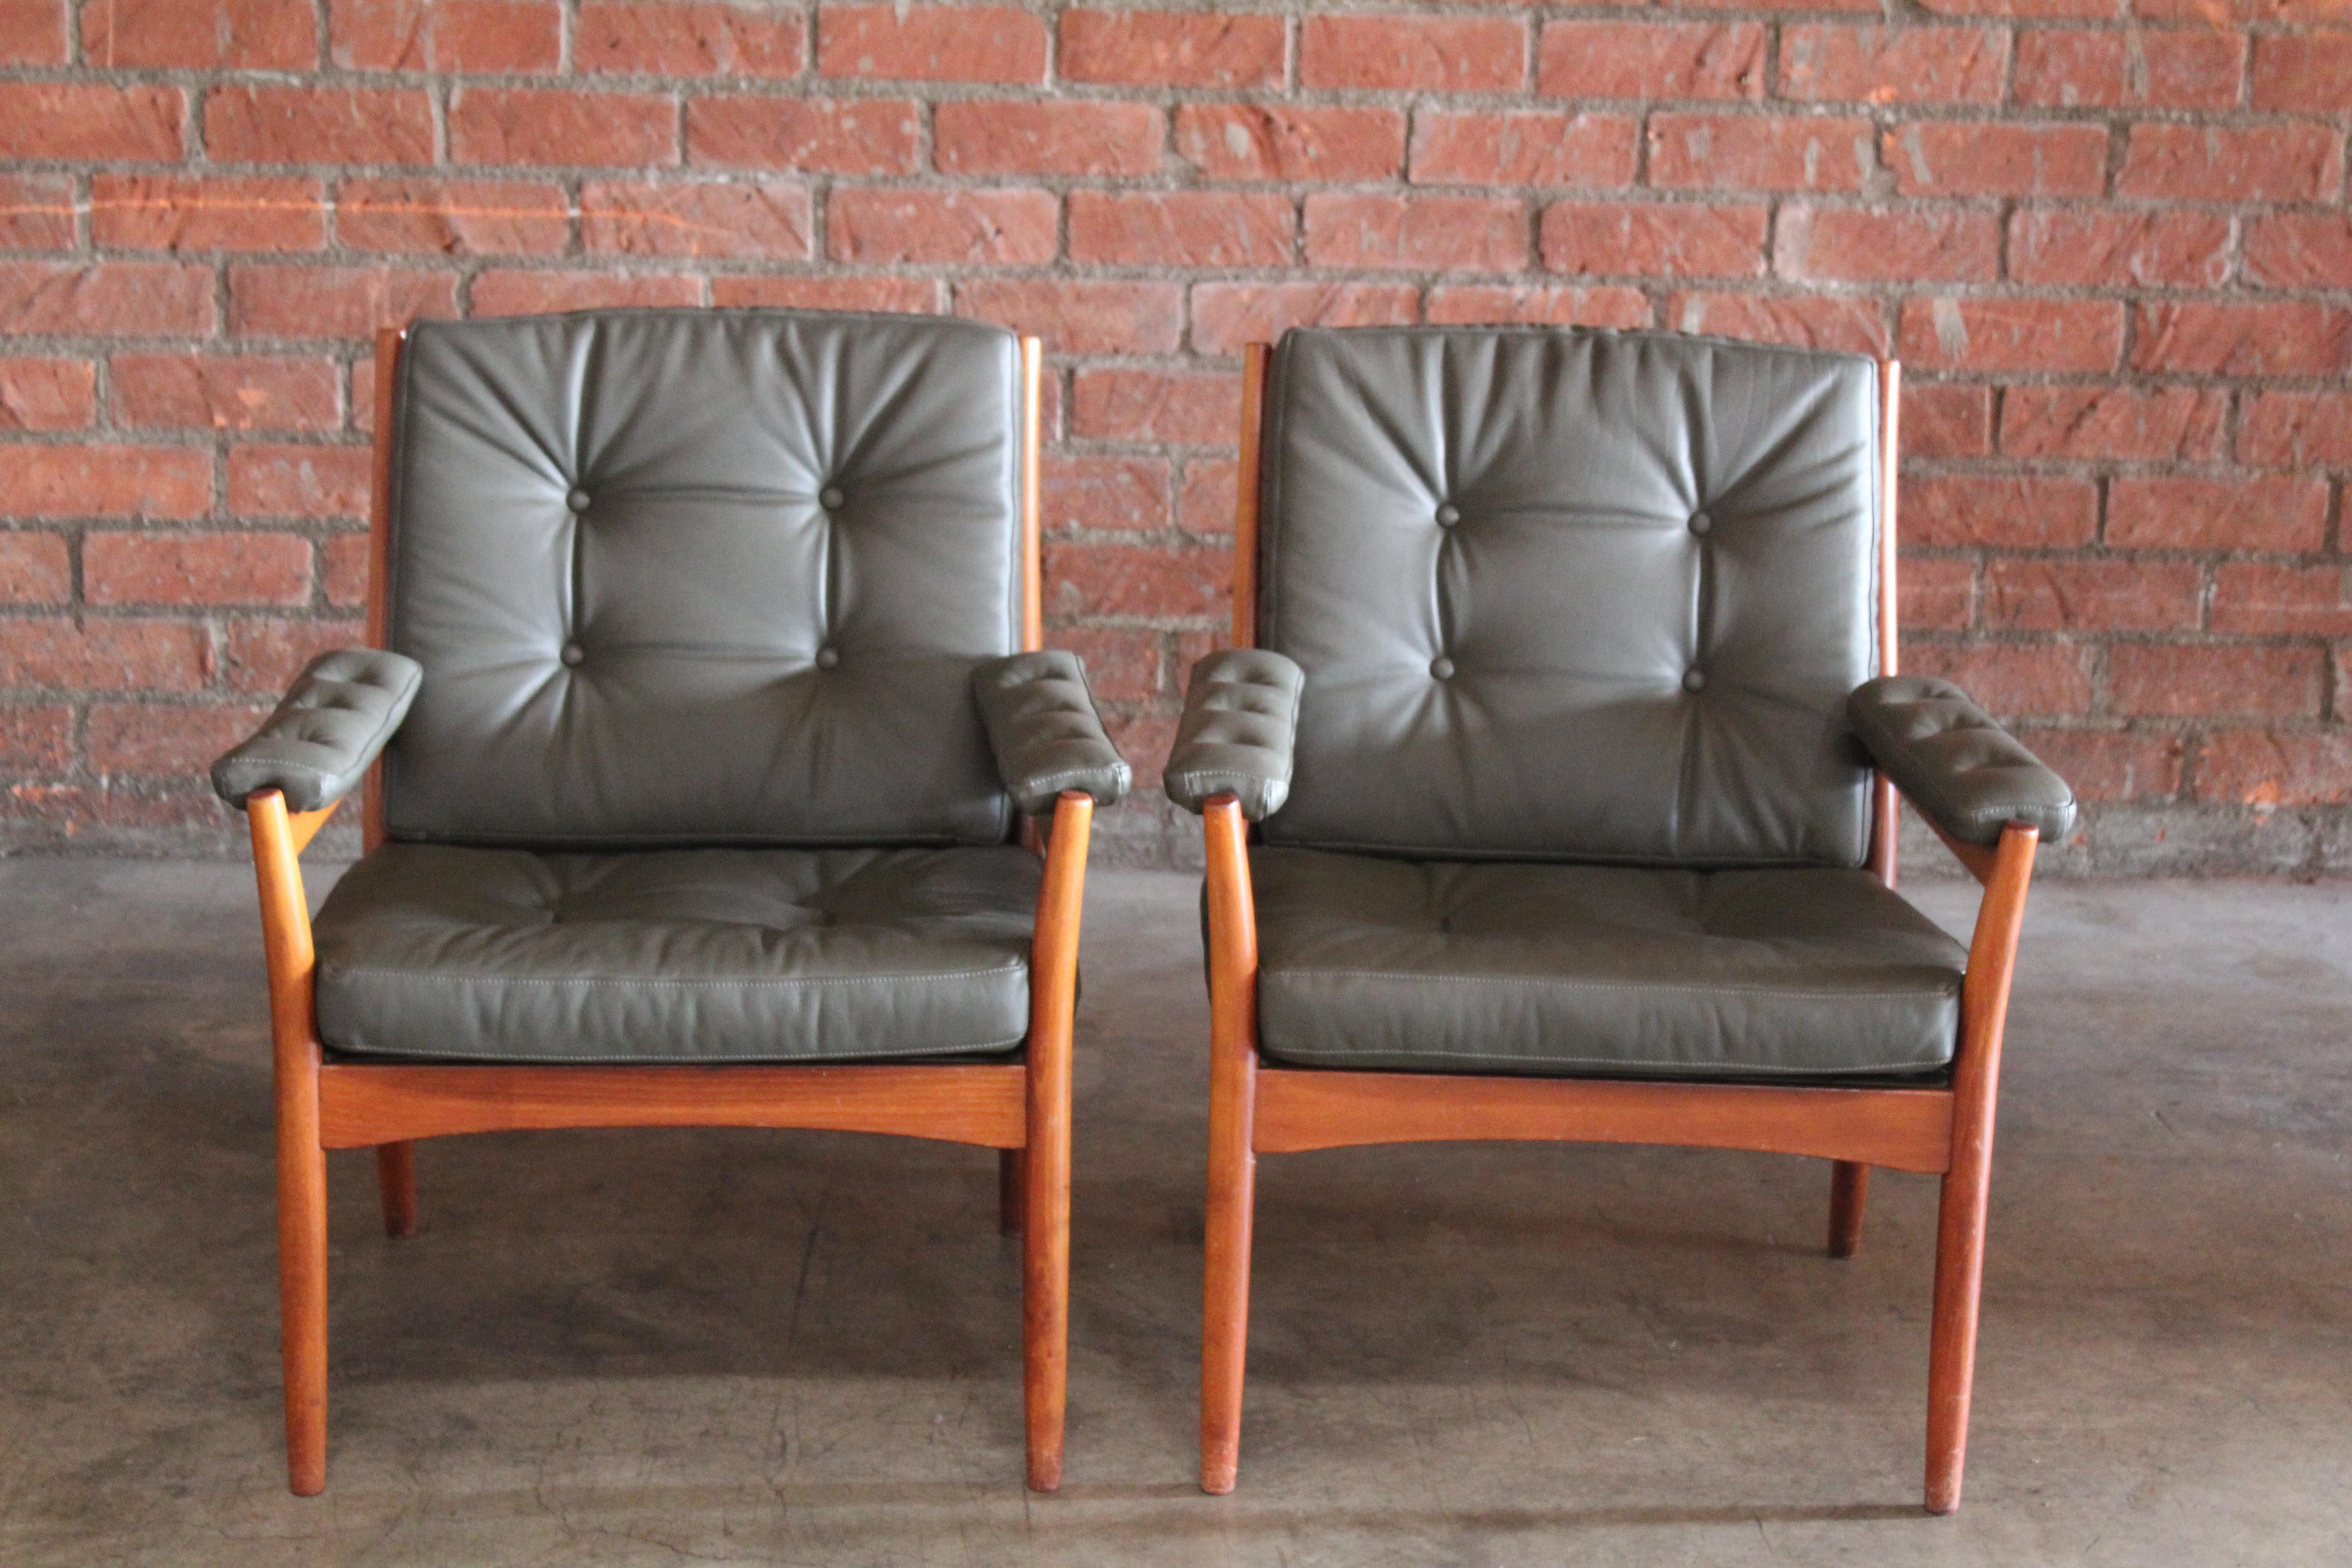 Pair of 1960s beech wood lounge chairs by Gote Mobler, Sweden. They are in their original dark finish with new genuine leather cushions in dark olive green. The upholstery is in pristine condition. The frames show minor signs of wear. Sold as a